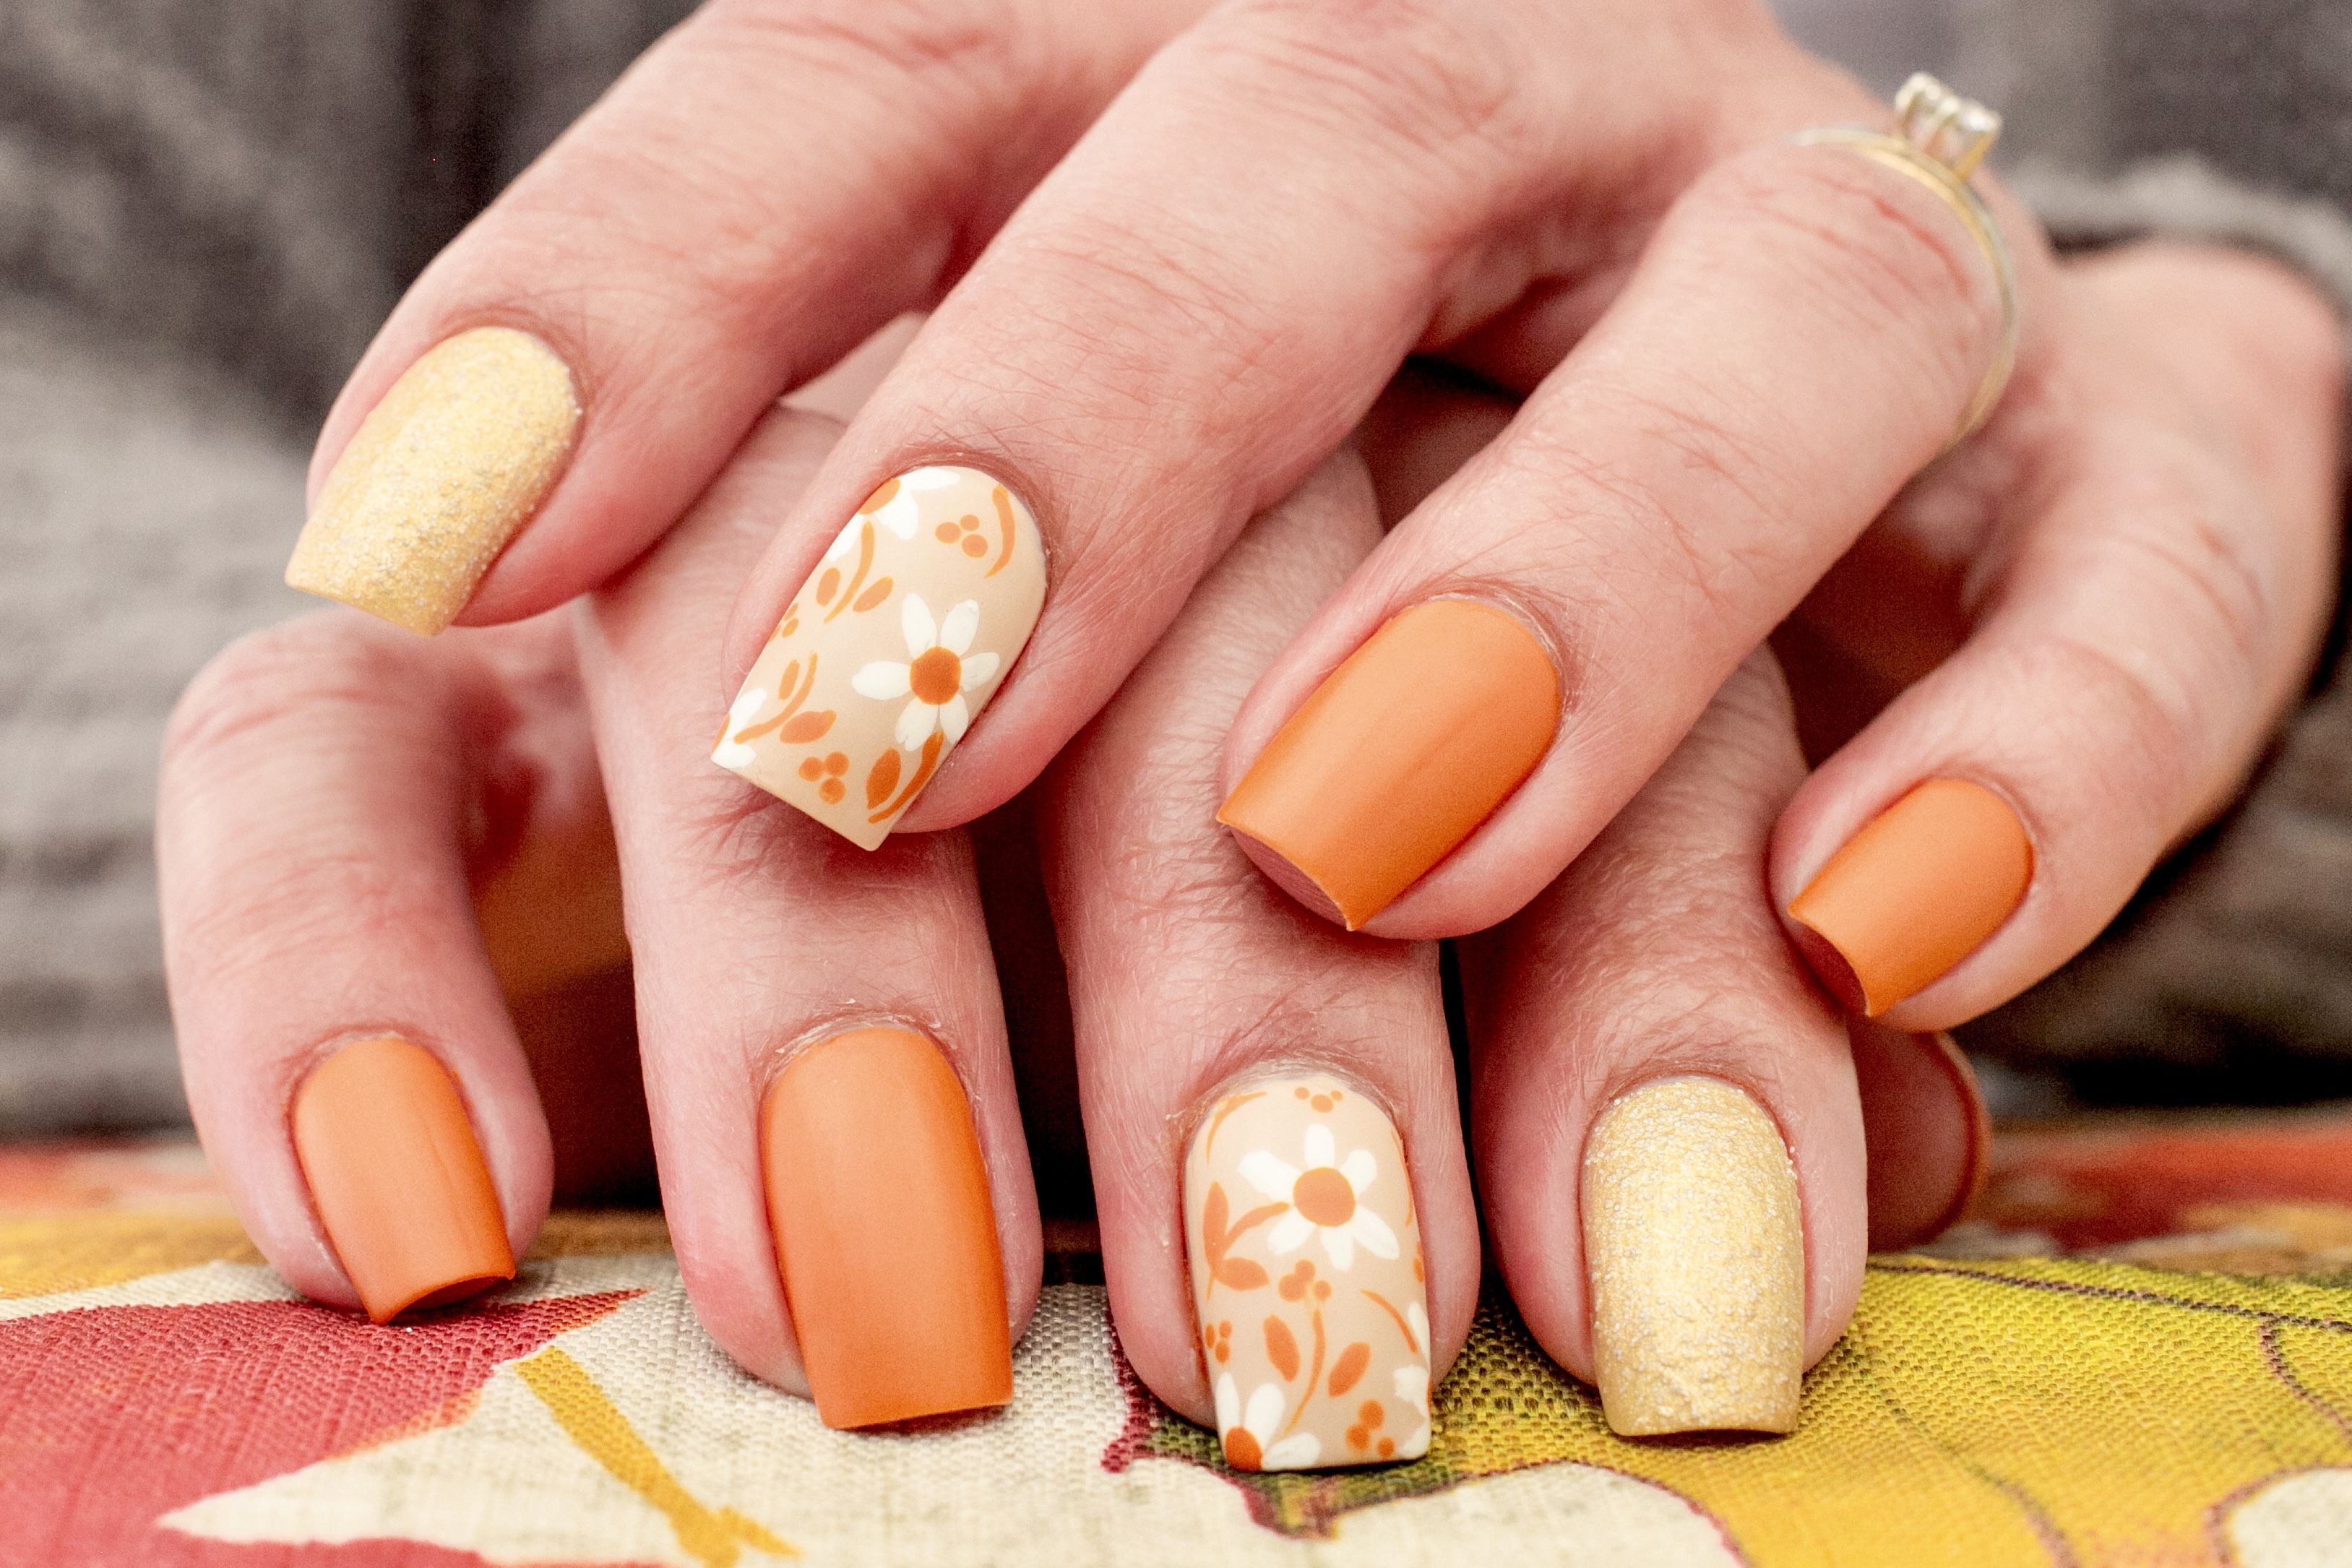 2. 50+ Best Fall Nail Designs to Copy This Year - wide 3